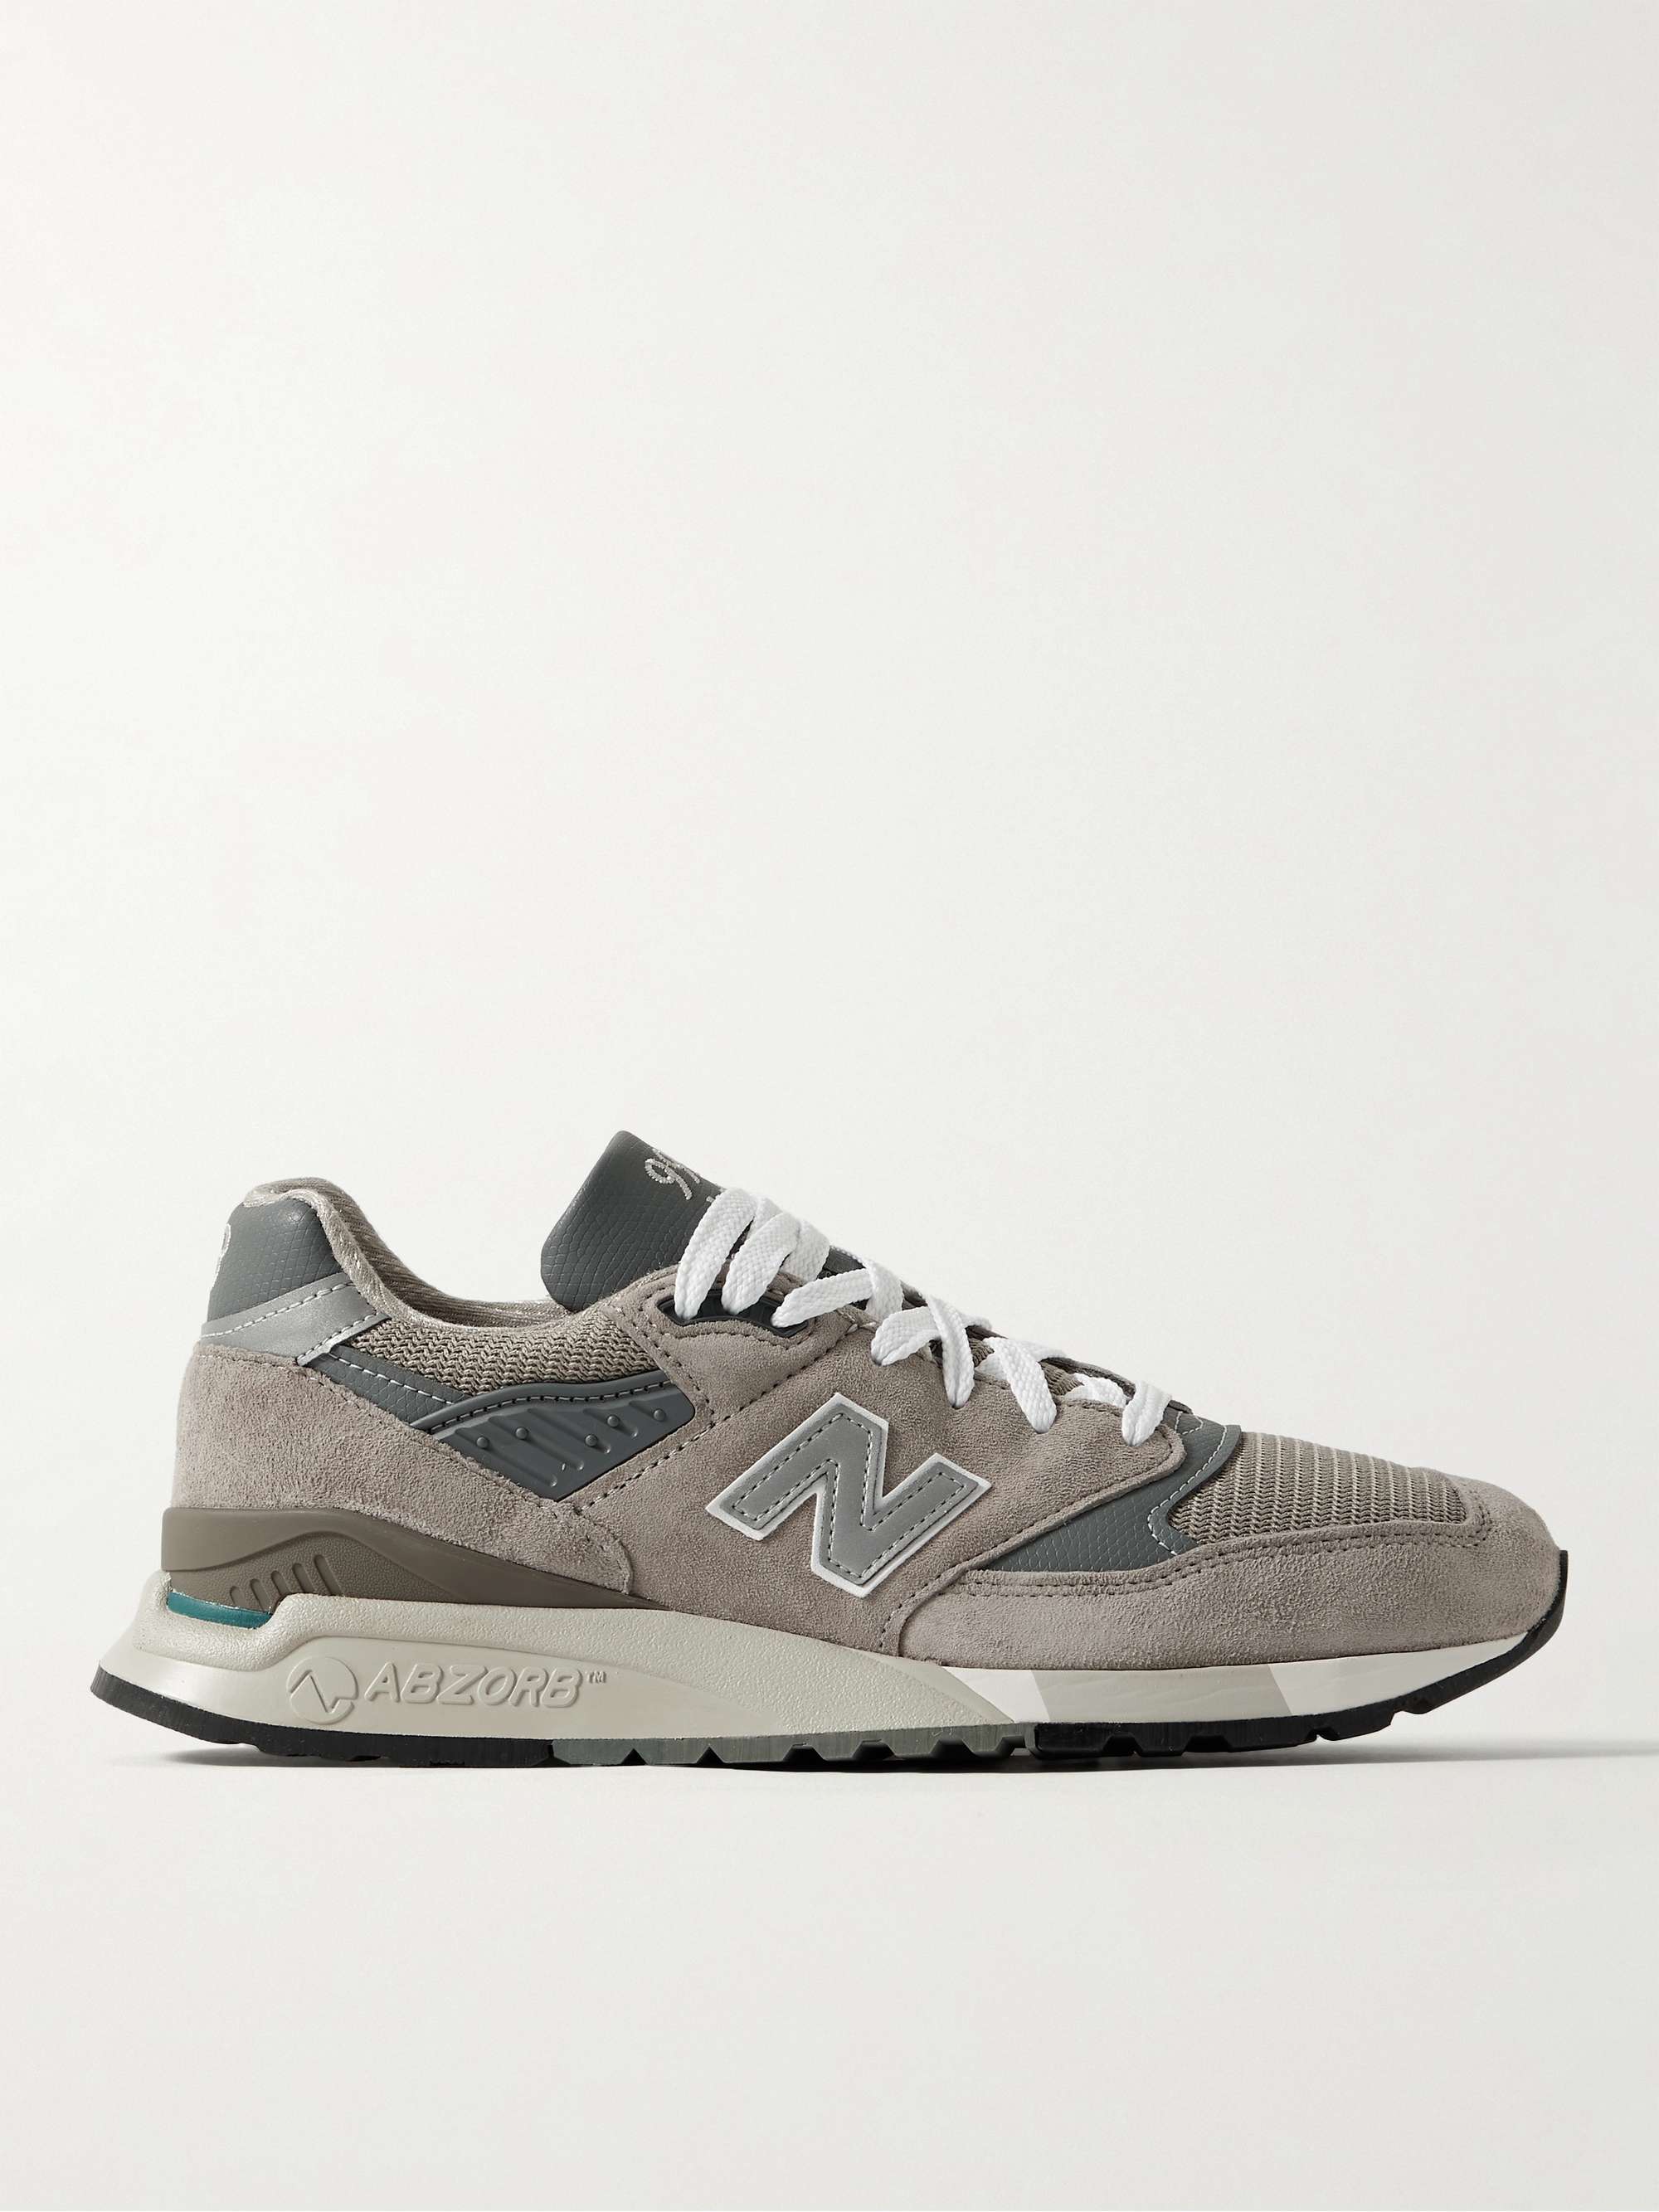 998 Core Rubber-Trimmed Leather, Mesh and Suede Sneakers